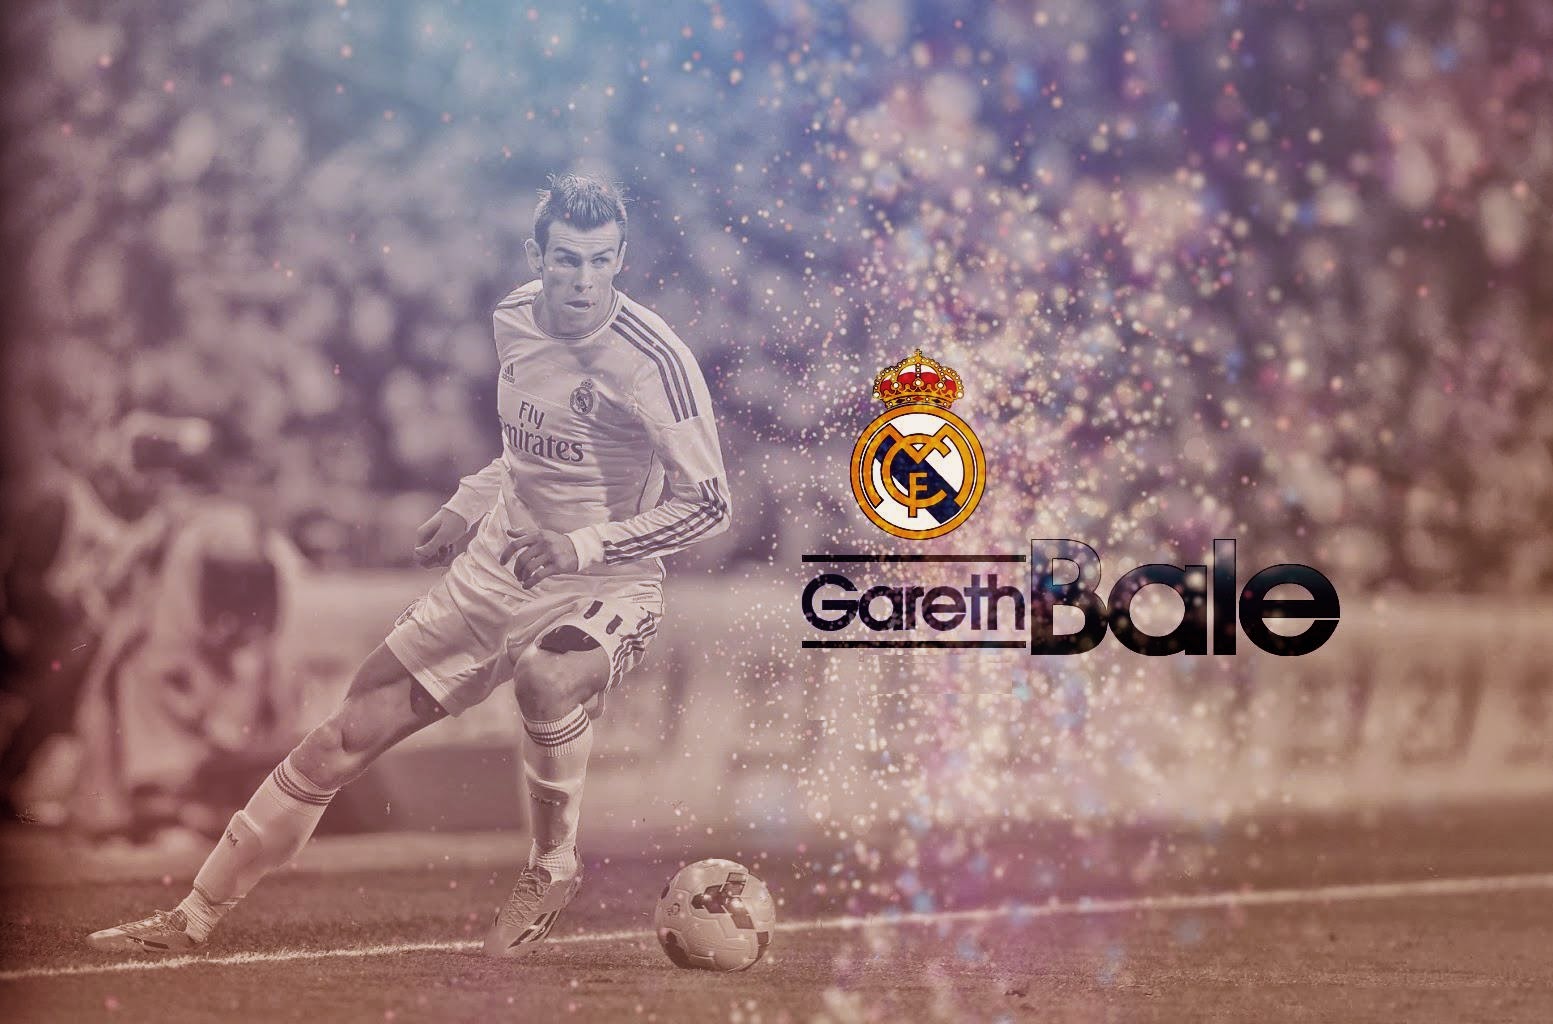 gareth bale hd wallpapers,player,football player,football,sport venue,competition event